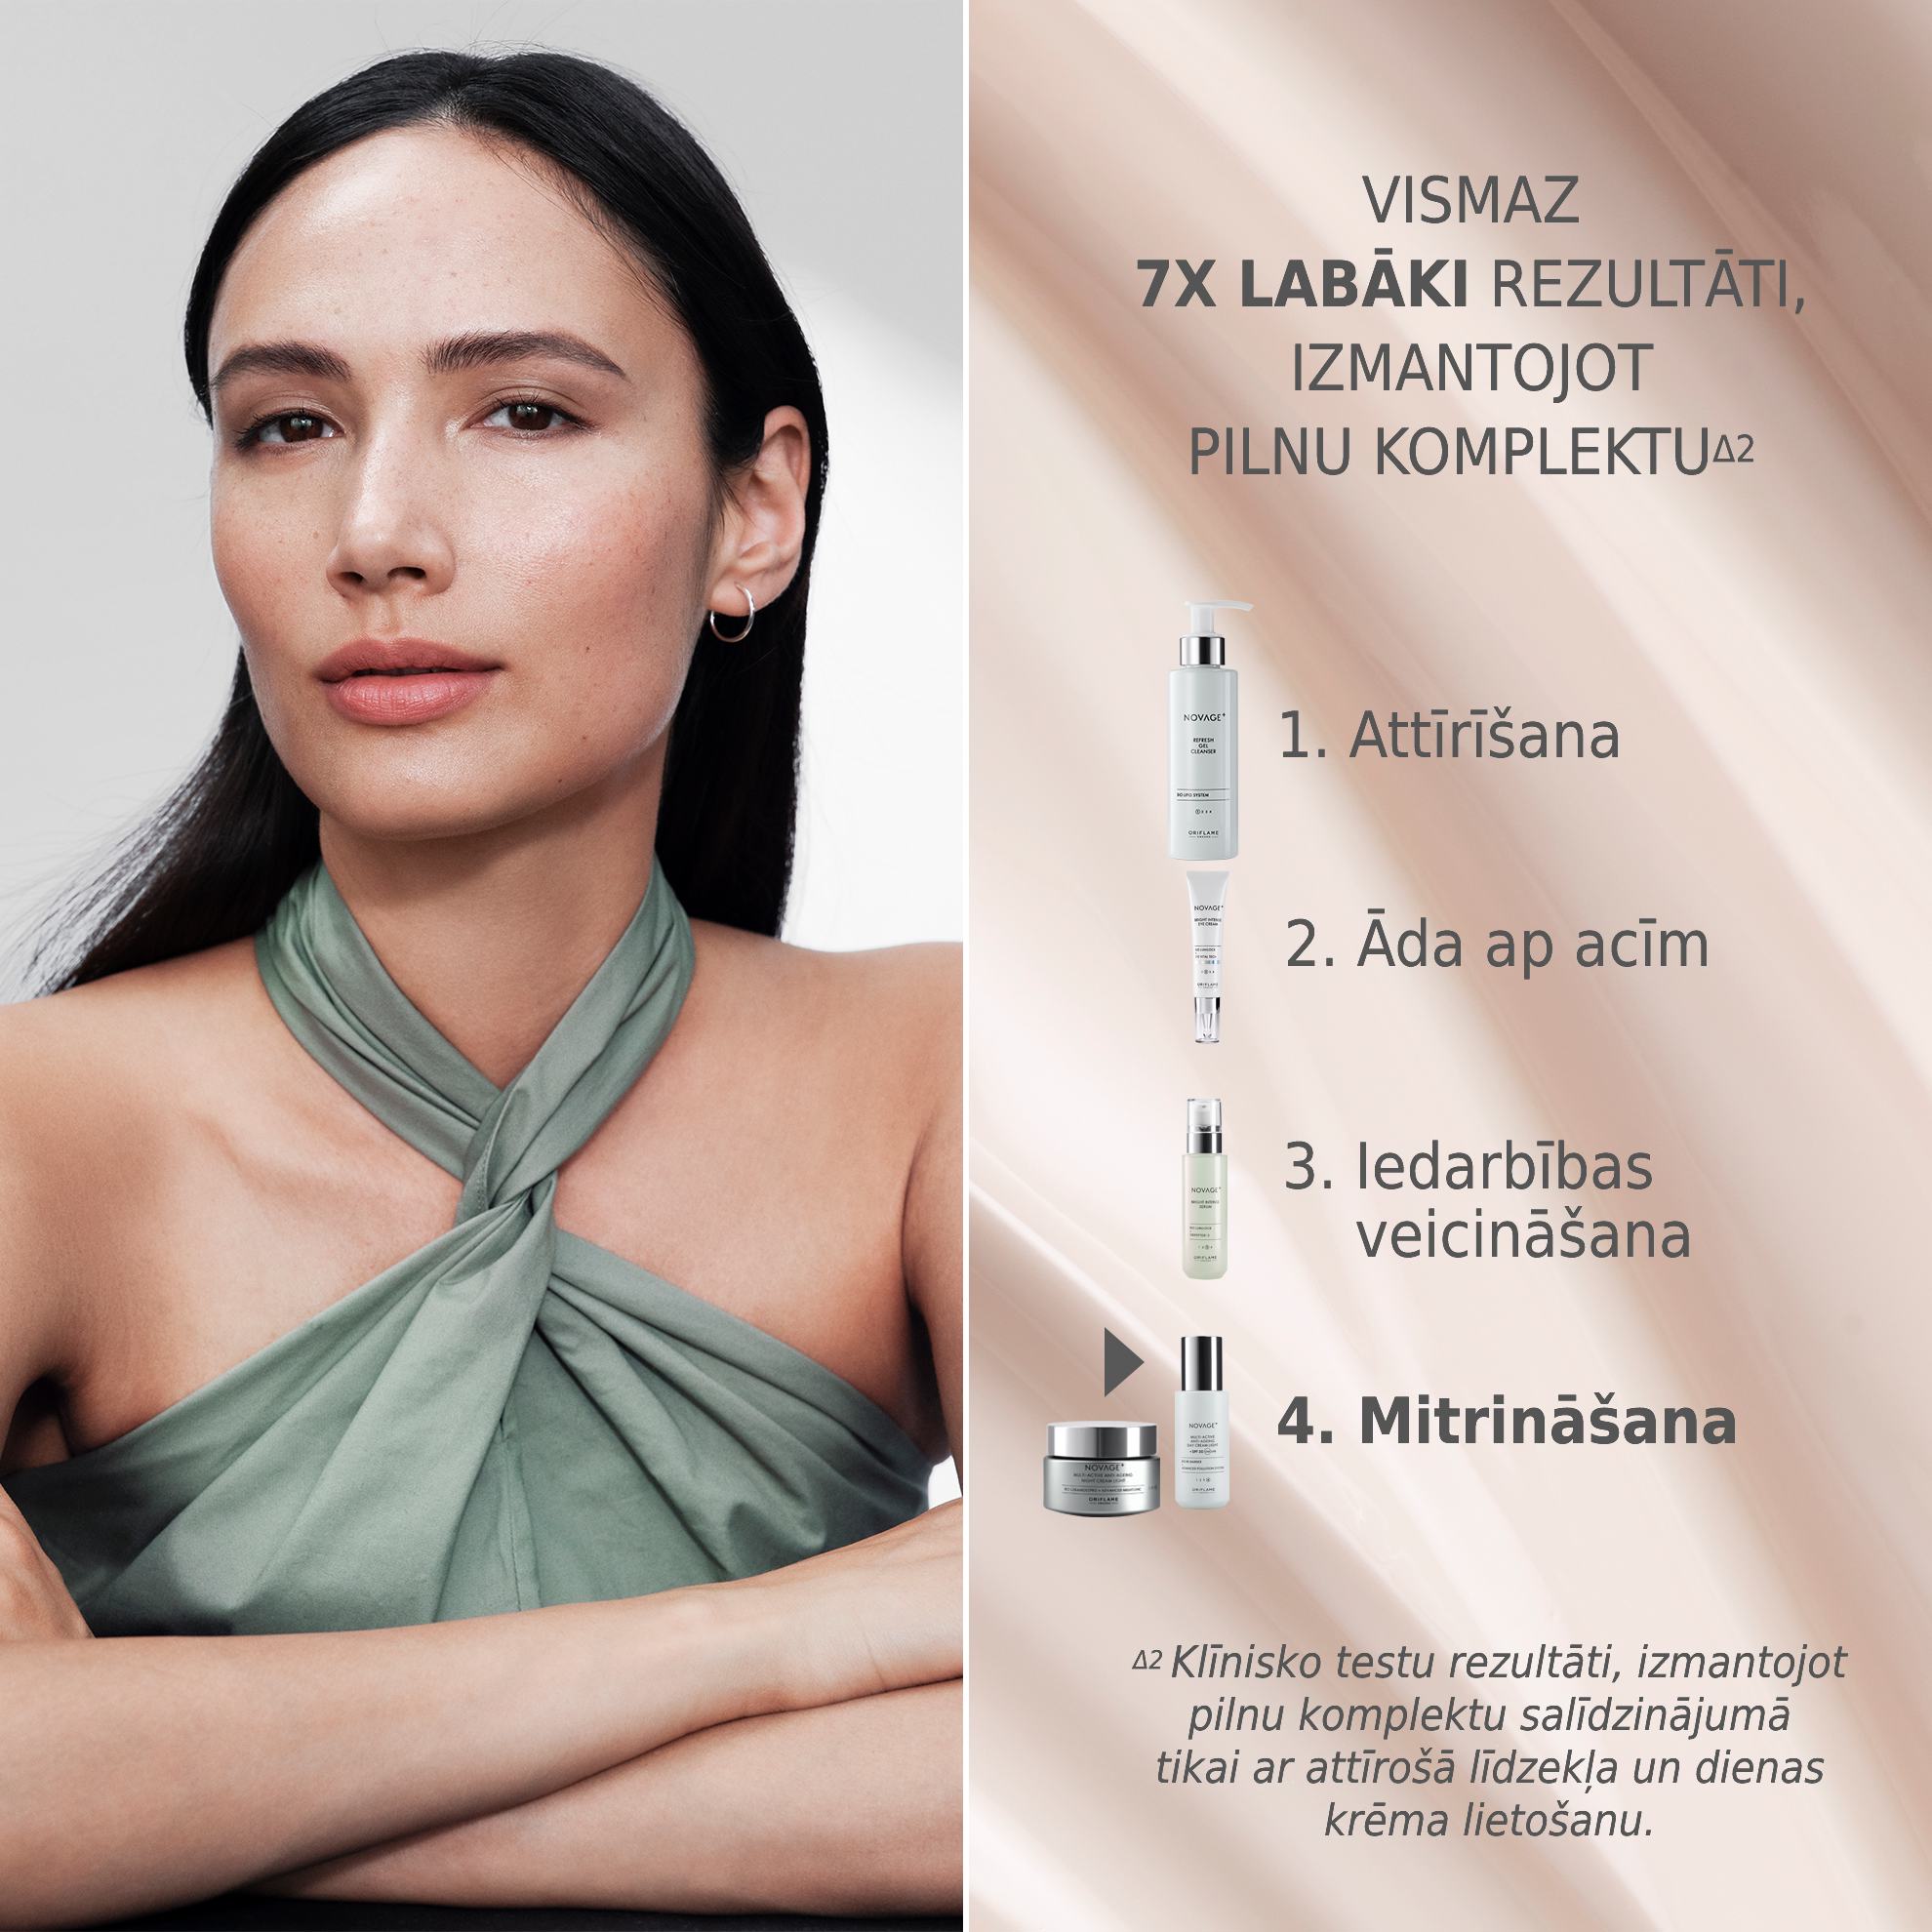 https://media-cdn.oriflame.com/productImage?externalMediaId=product-management-media%2fProducts%2f41057%2fLV%2f41057_4.png&id=17606061&version=3